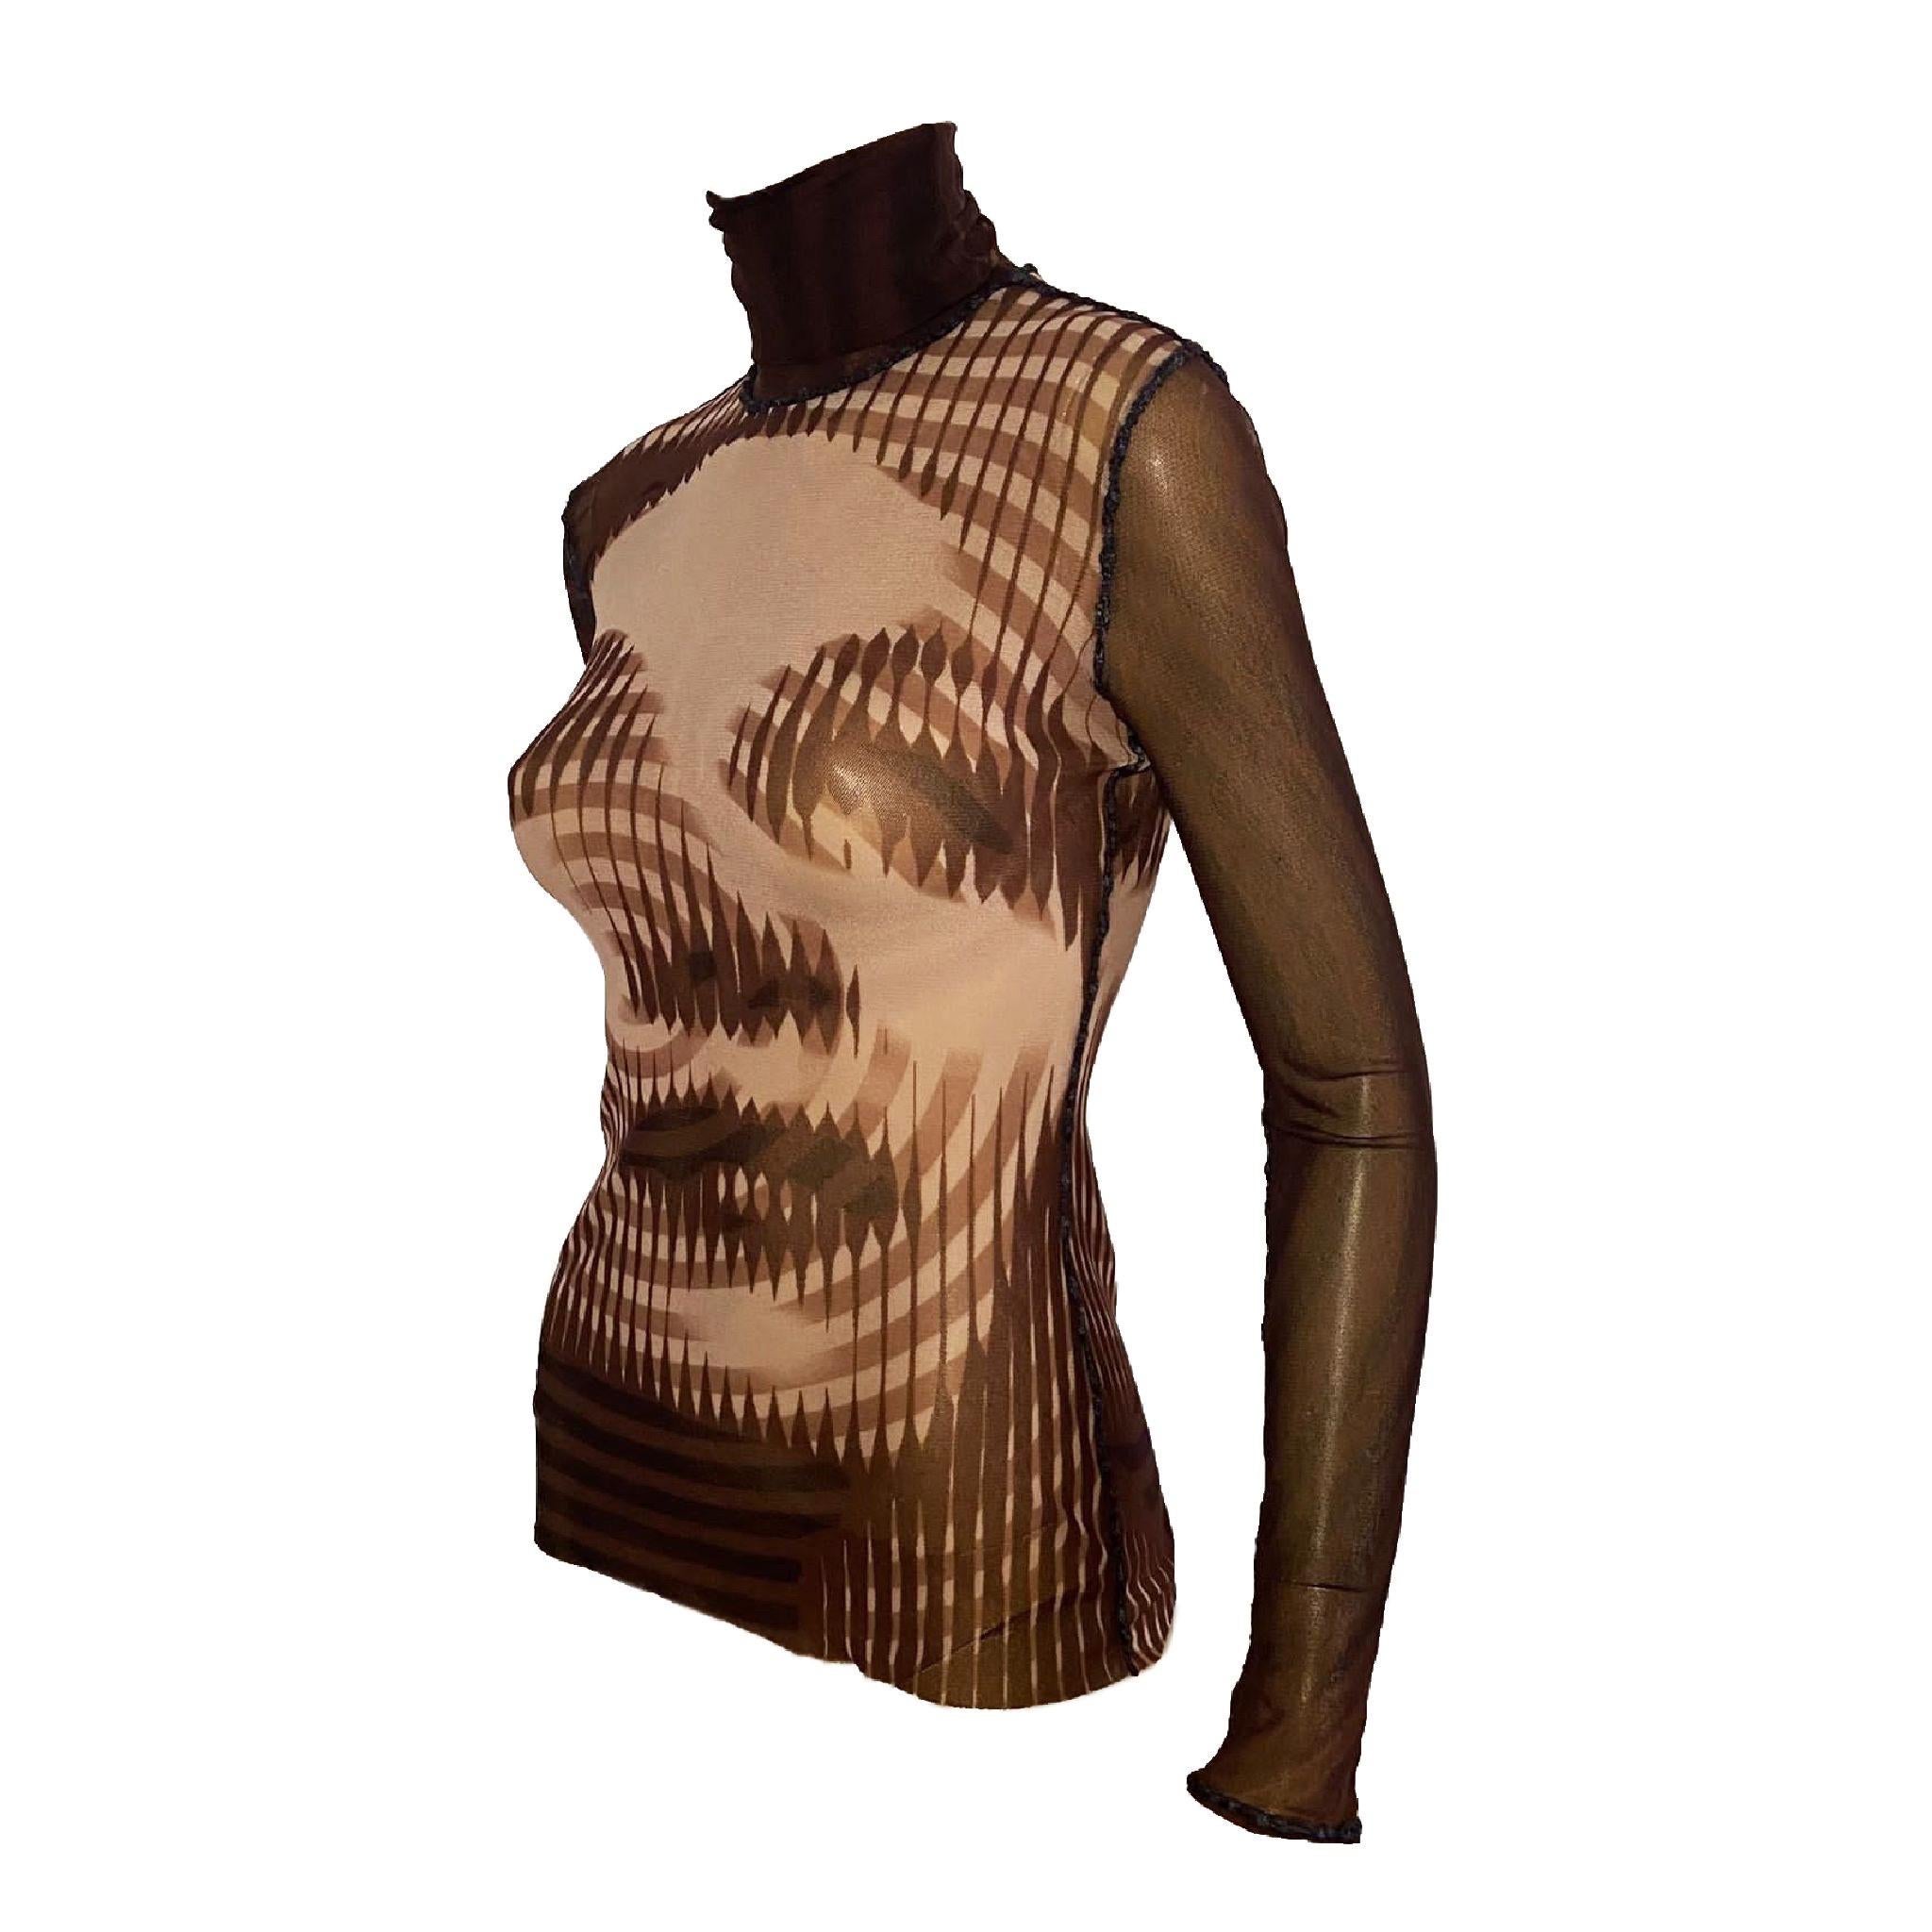 Jean Paul Gaultier maroon long sleeve turtleneck mesh top featuring the iconic Op Art inspired Marlene Dietrich print from Fall/Winter 2001 collection. Small hole (pictured), not visible when worn.

Size label M, can fit bigger sizes as well